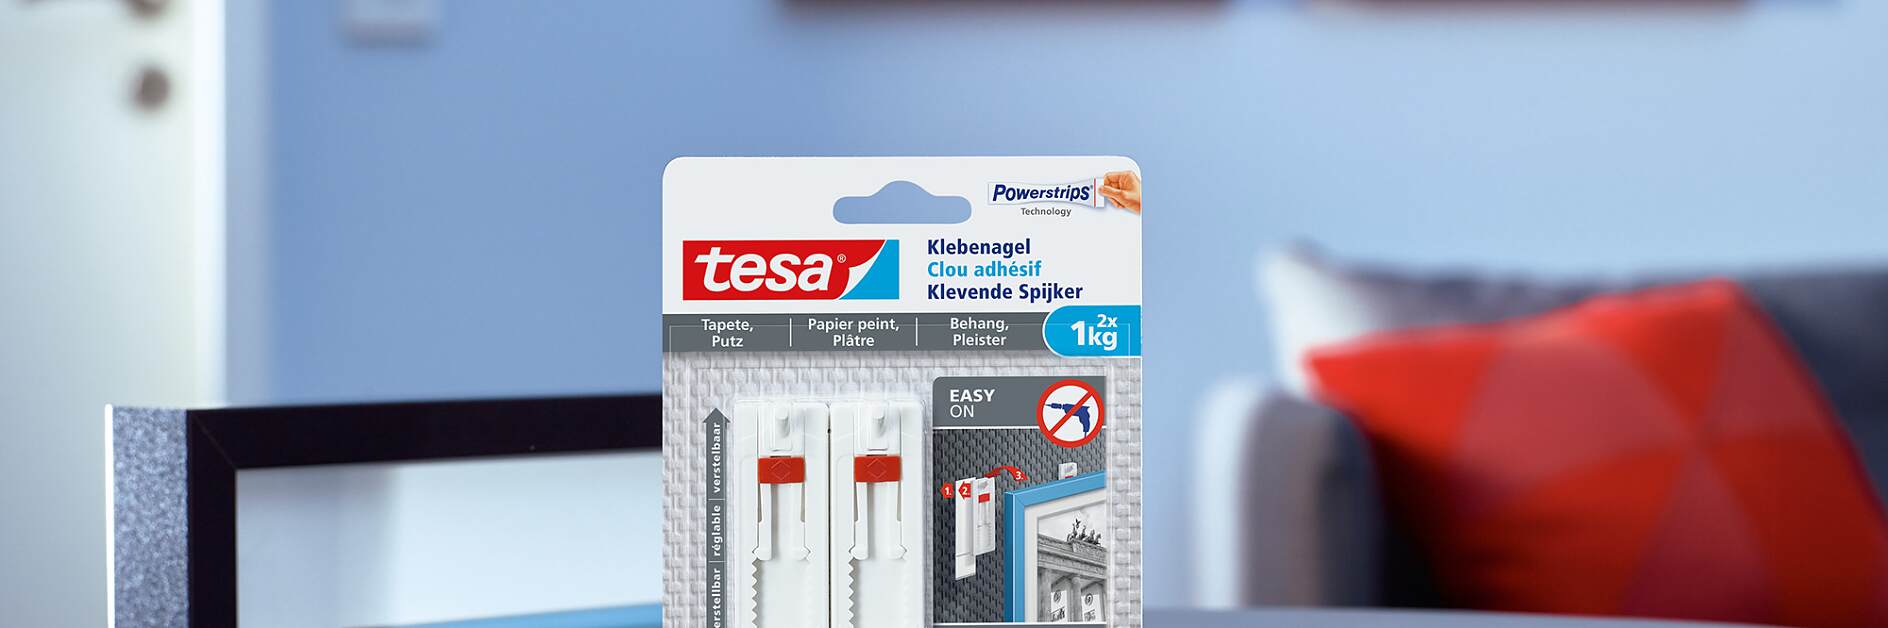 How to use the tesa® Adjustable Adhesive Nail for Wallpaper & Plaster 1kg.